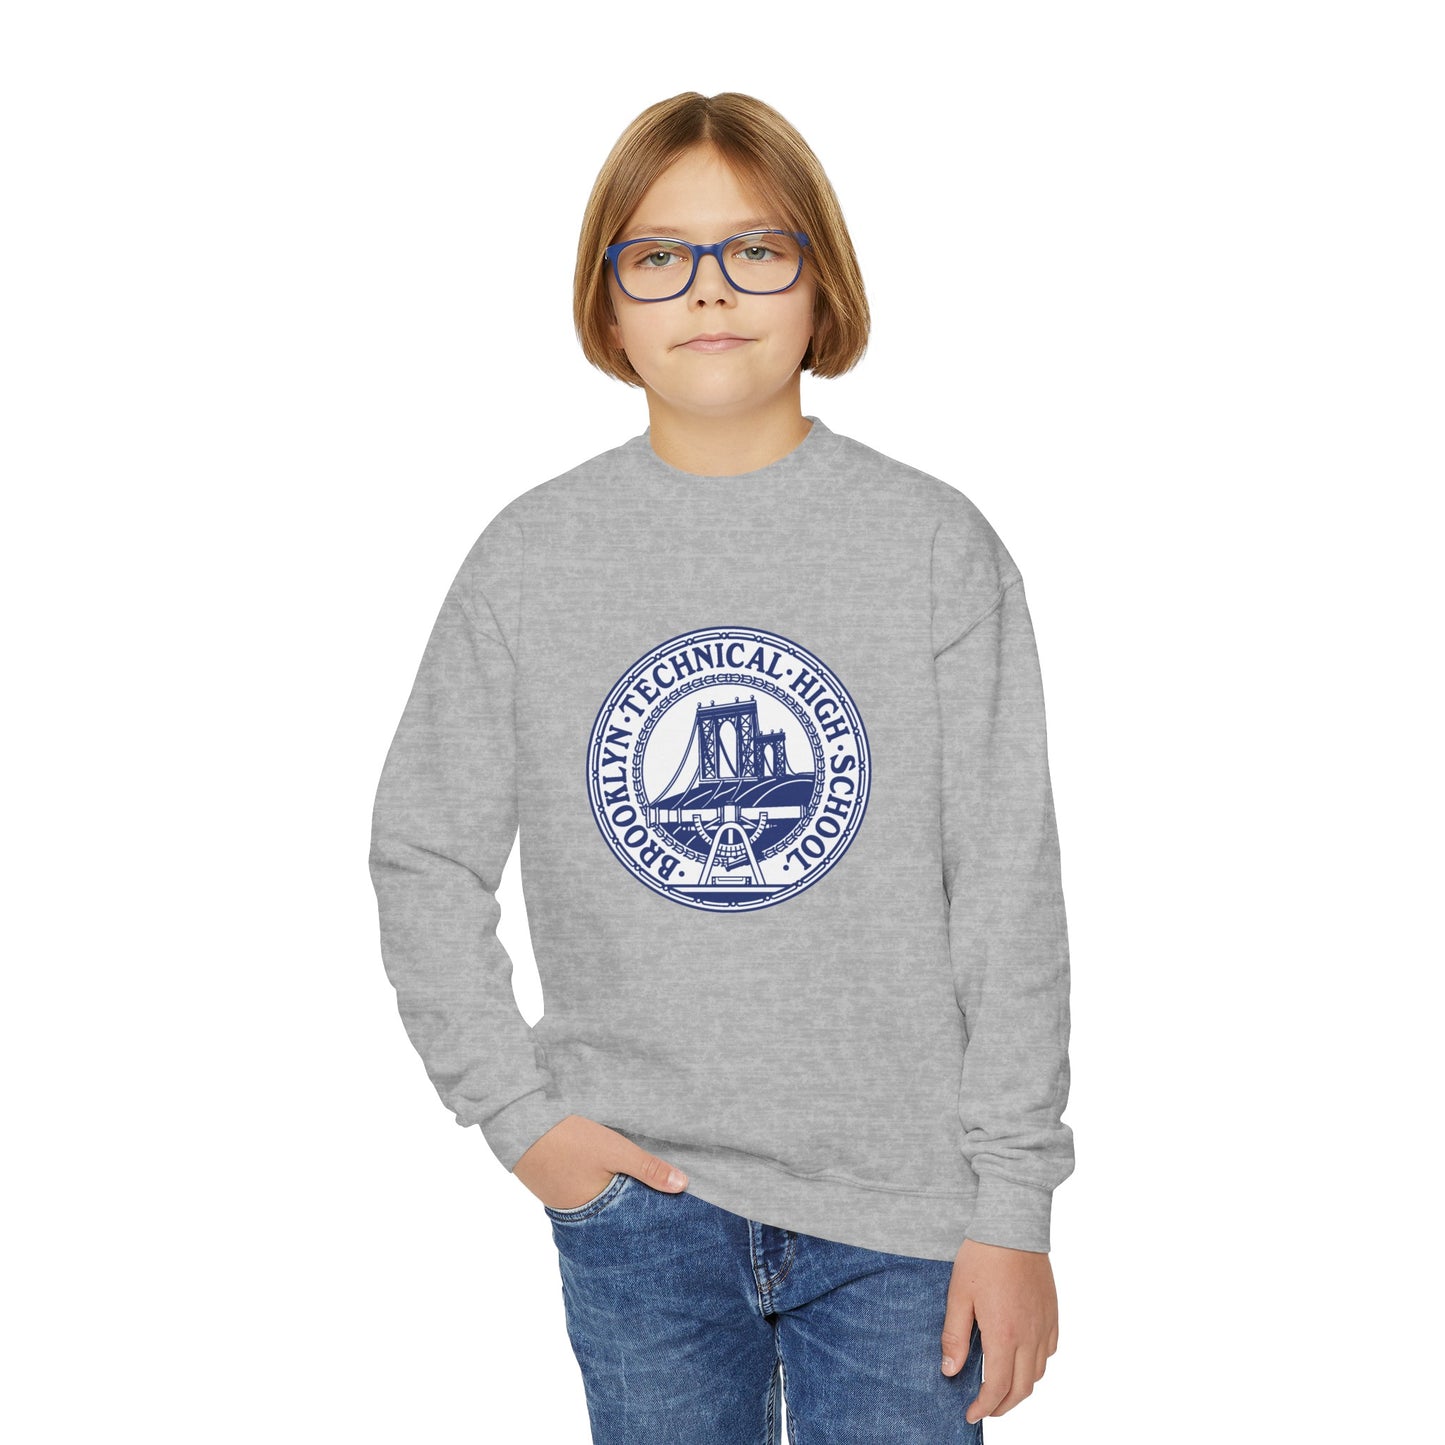 Family - Classic Tech Seal With Background - Youth Crewneck Sweatshirt